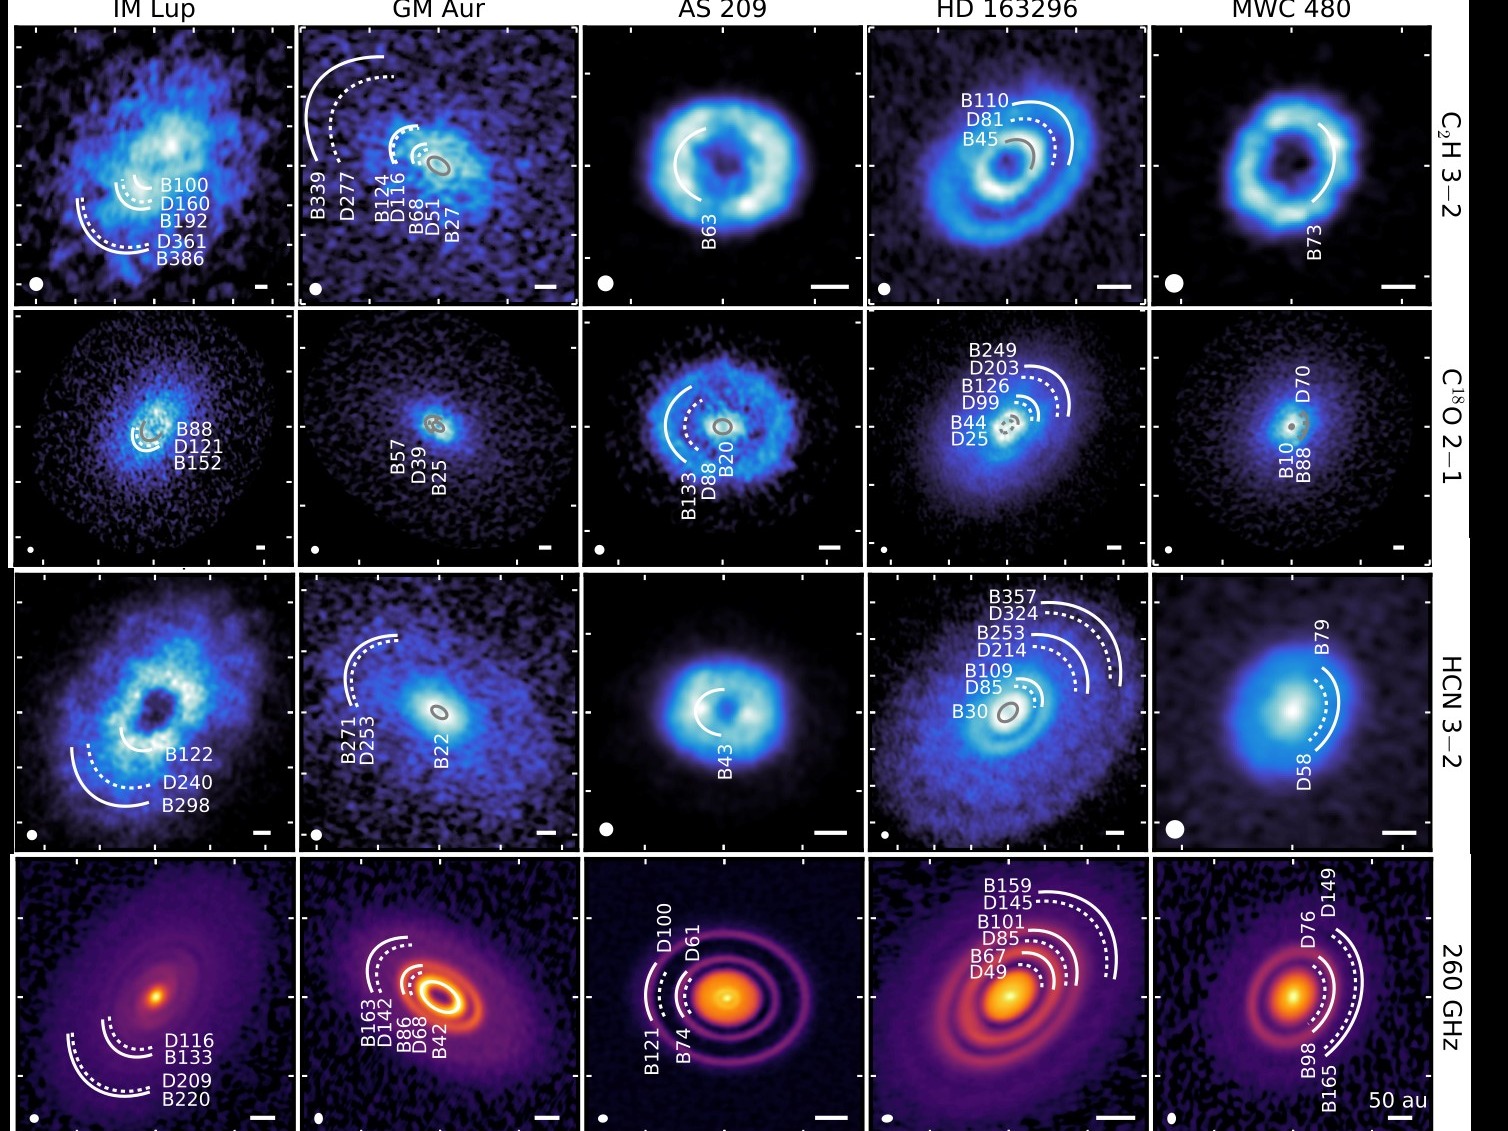 Are substructures in different components of protoplanetary disks correlated?